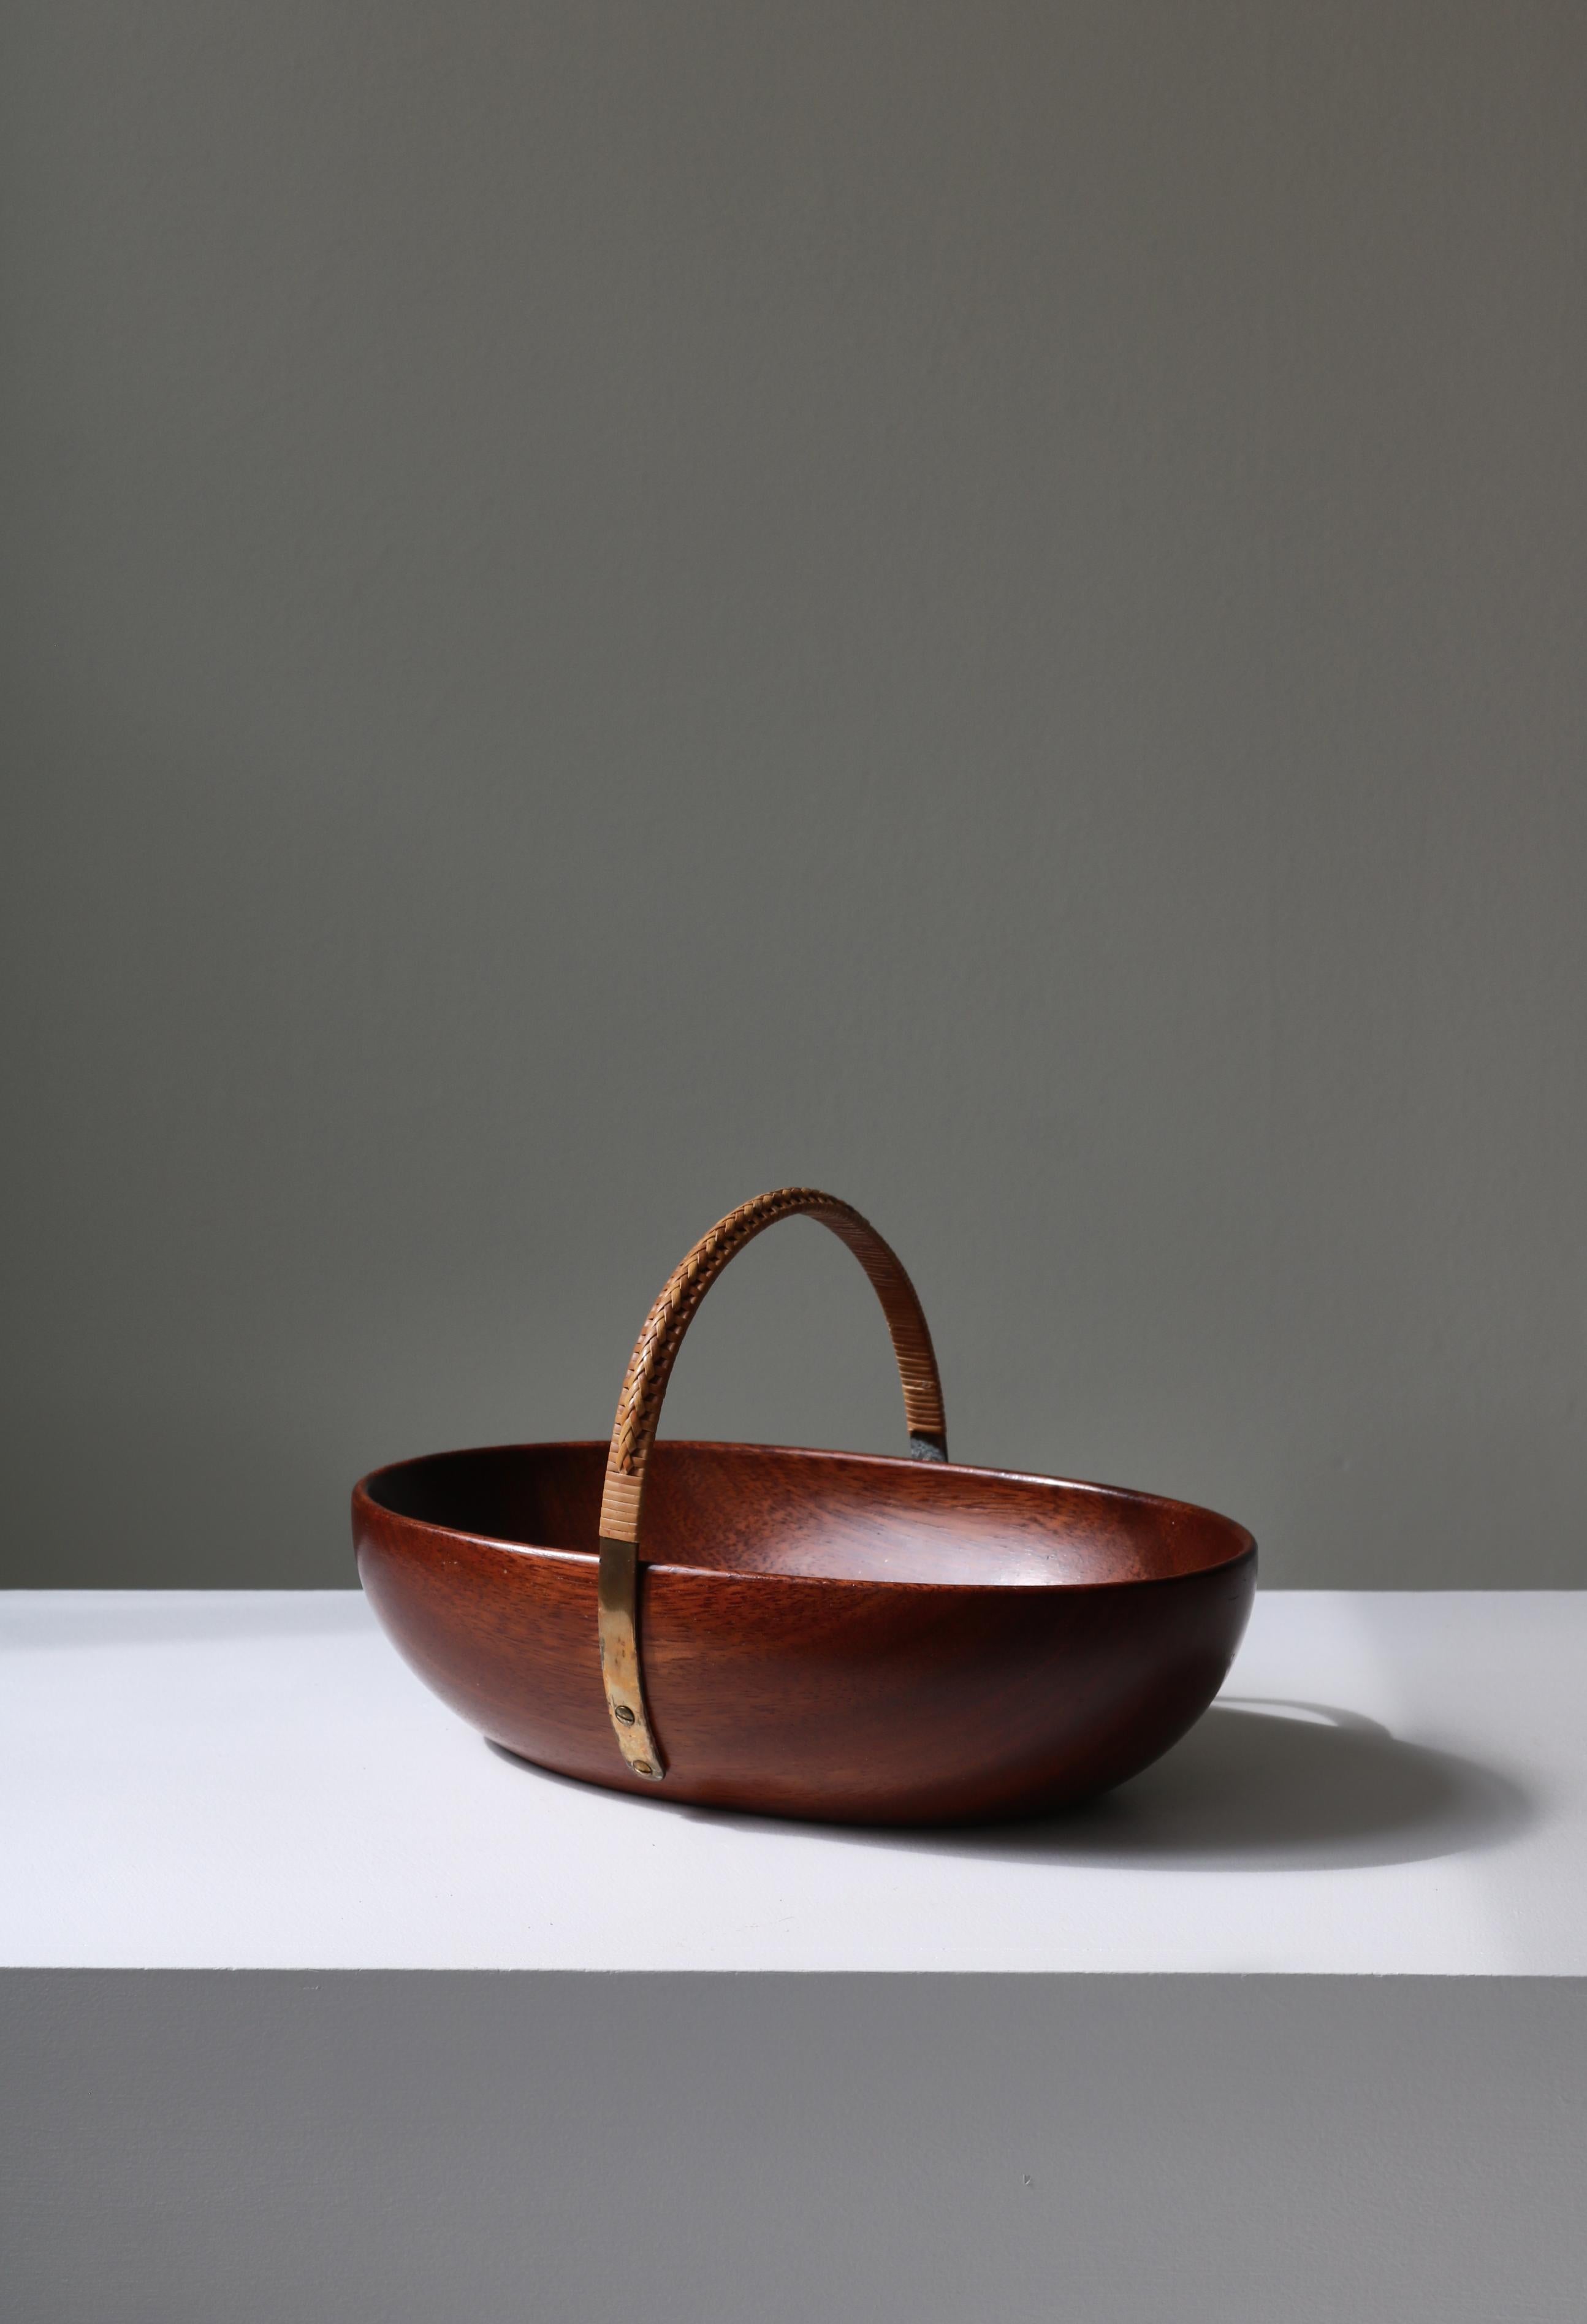 Wonderful nut bowl by Carl Auböck II handmade in his workshop in Vienna, Austria, 1955. Made out of carved mahogany, the bowl has a brass handle that follow the shape of the same bowl and is covered in wicker. Great condition with no breaks or